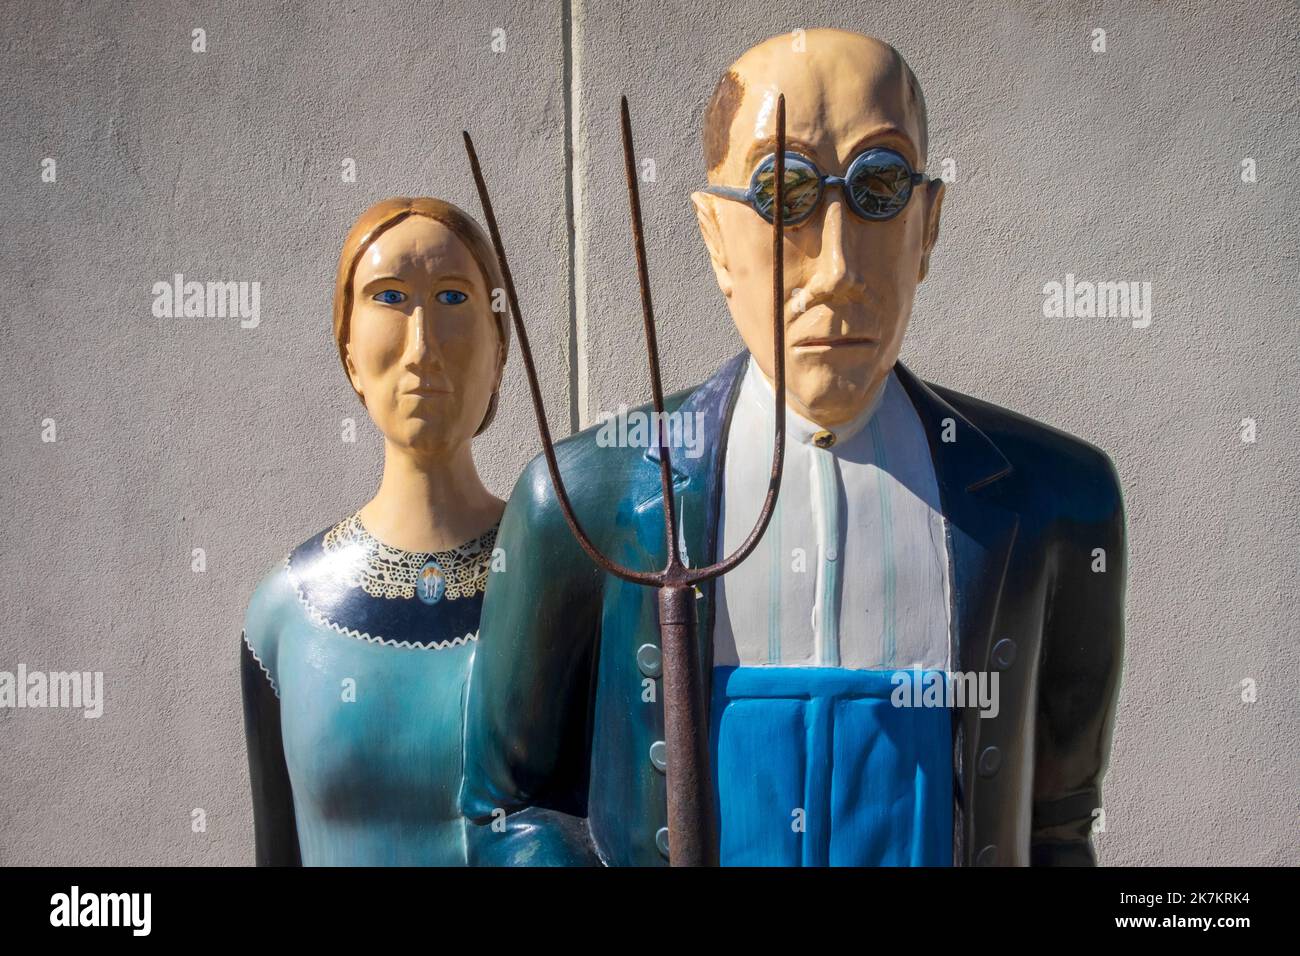 Grant Wood's American Gothic House, Eldon, Iowa; statues of man and woman with a pitchfork Stock Photo